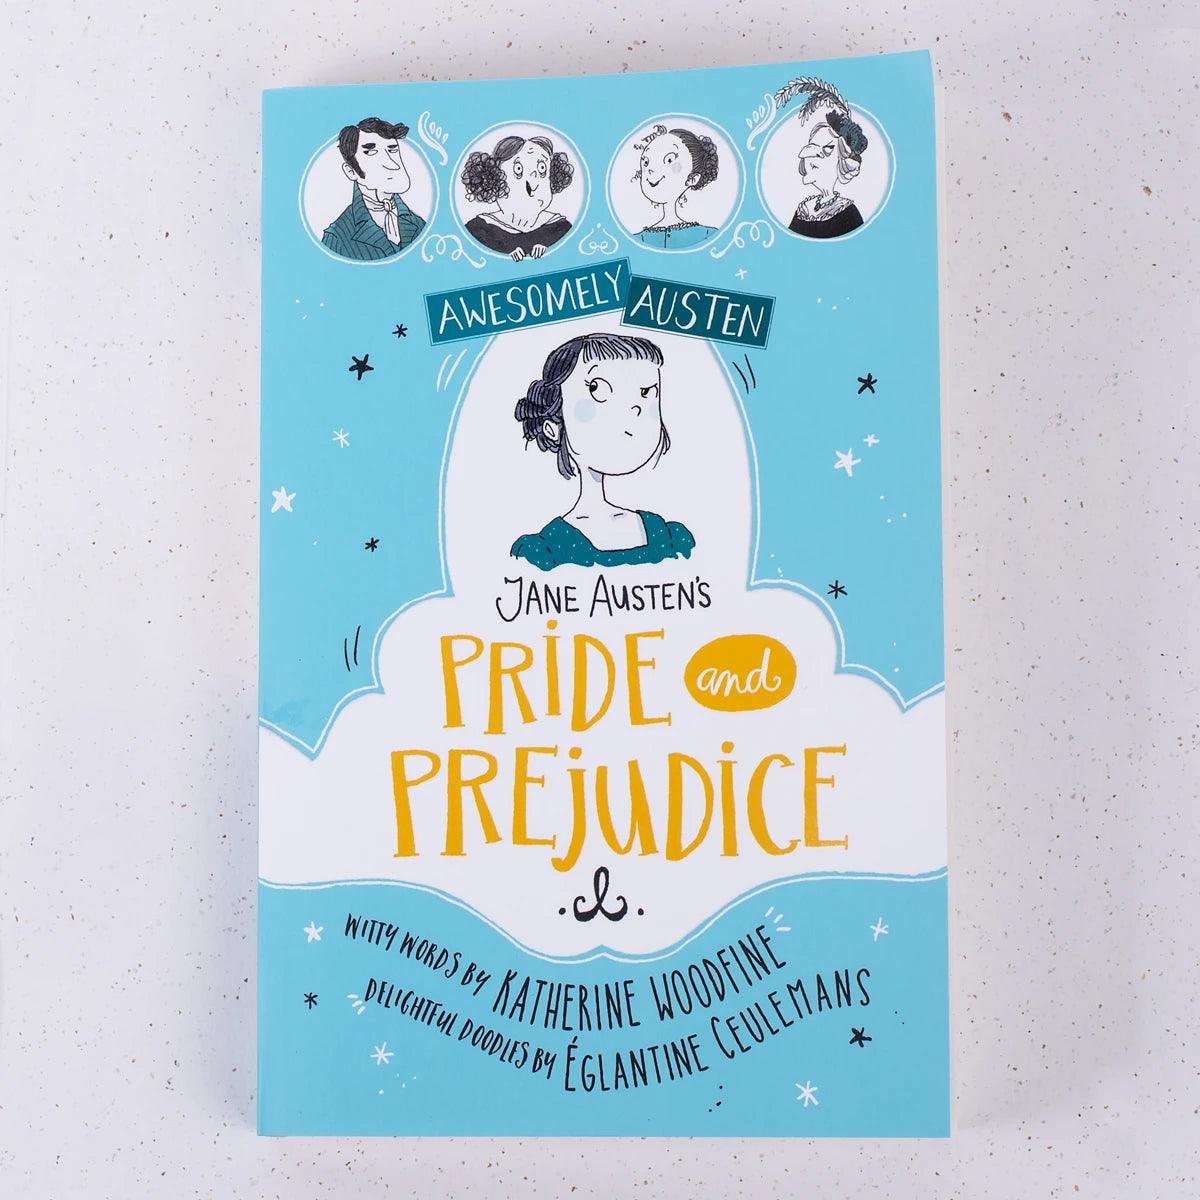 Jane Austen's Pride and Prejudice - Awesomely Austen Retold & Illustrated - JaneAusten.co.uk